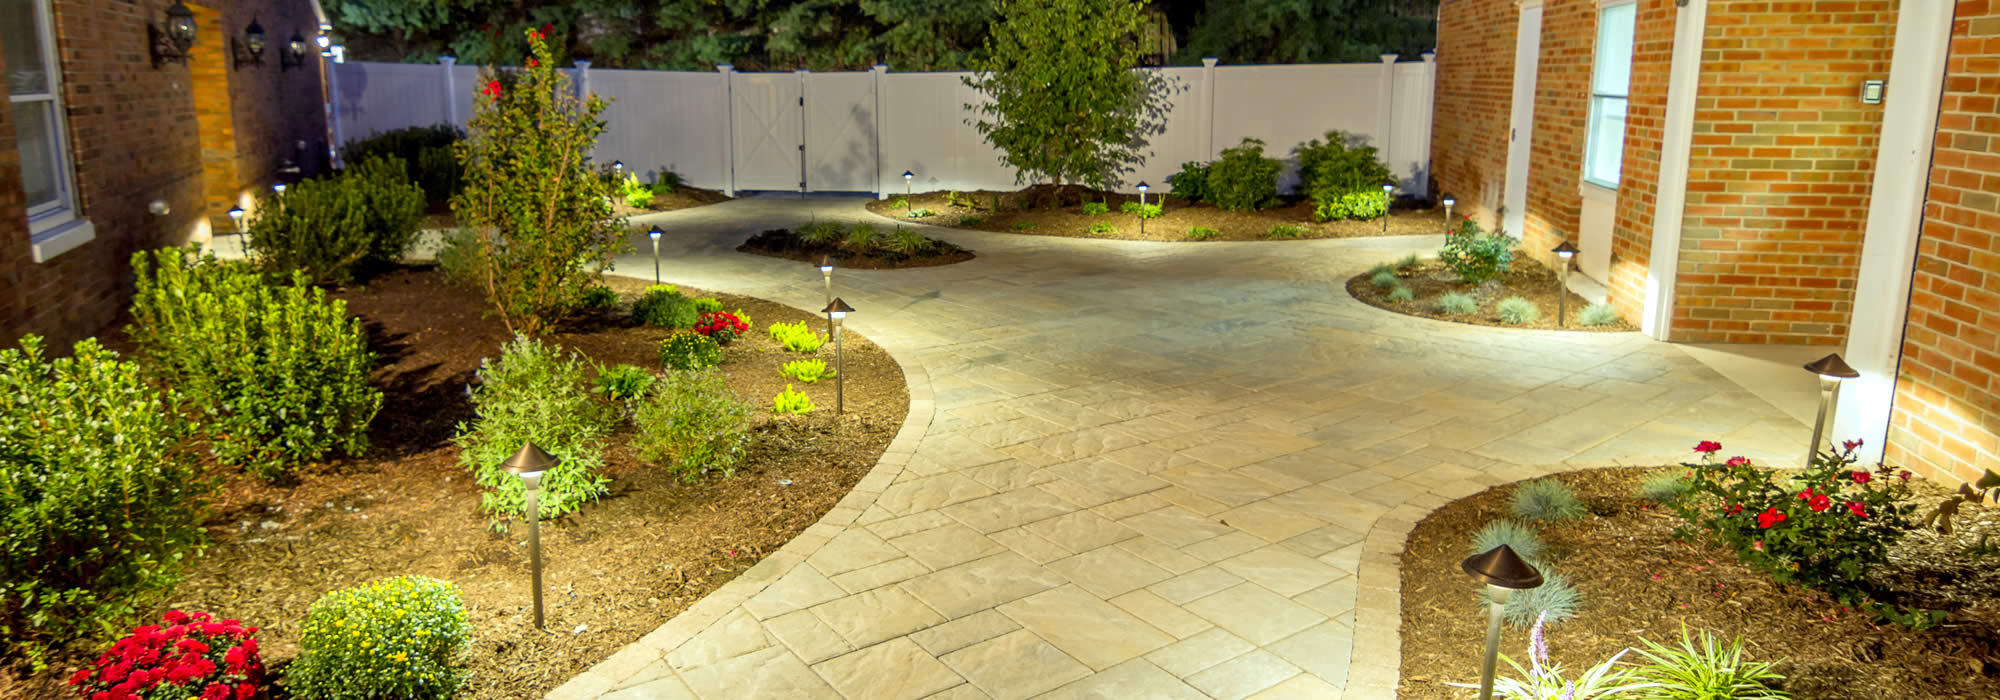 Landscaping Services in Town of Westport